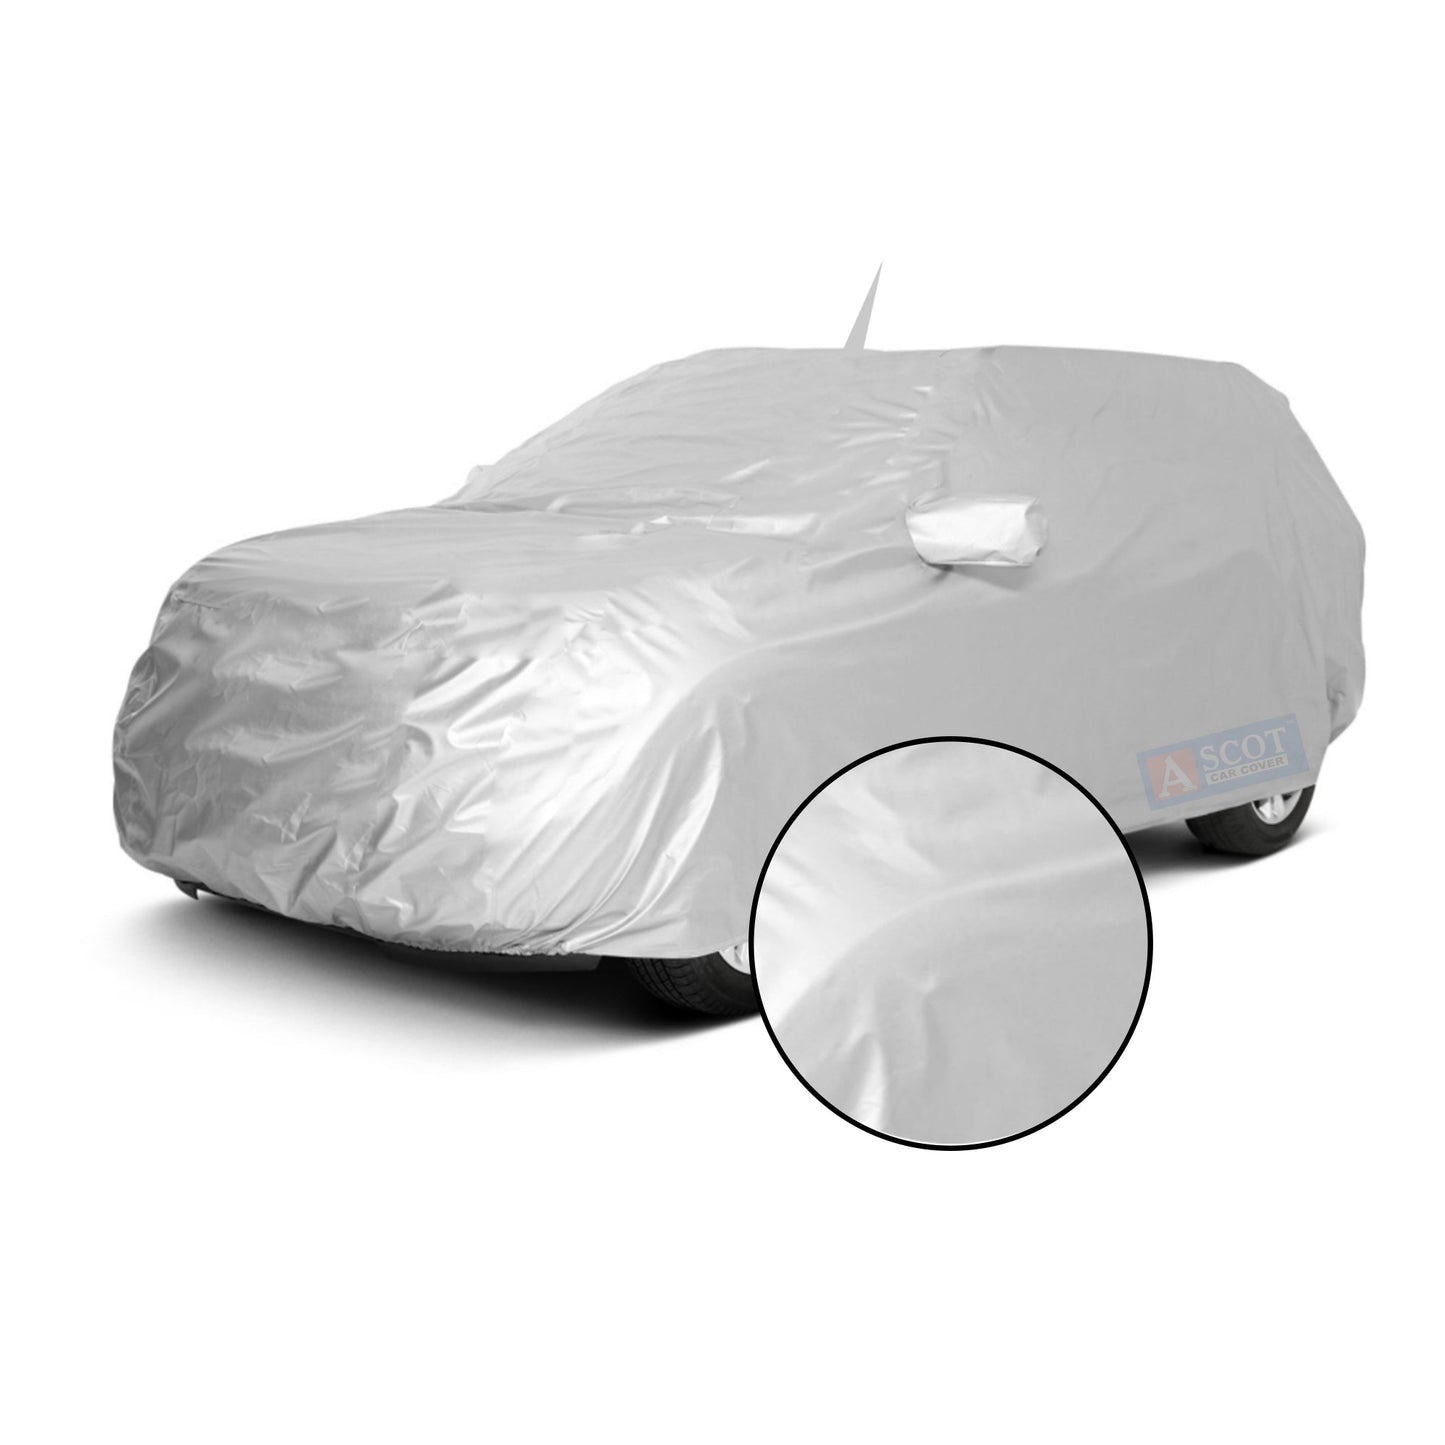 Ascot Renault Kiger Car Body Cover Dust Proof, Trippel Stitched